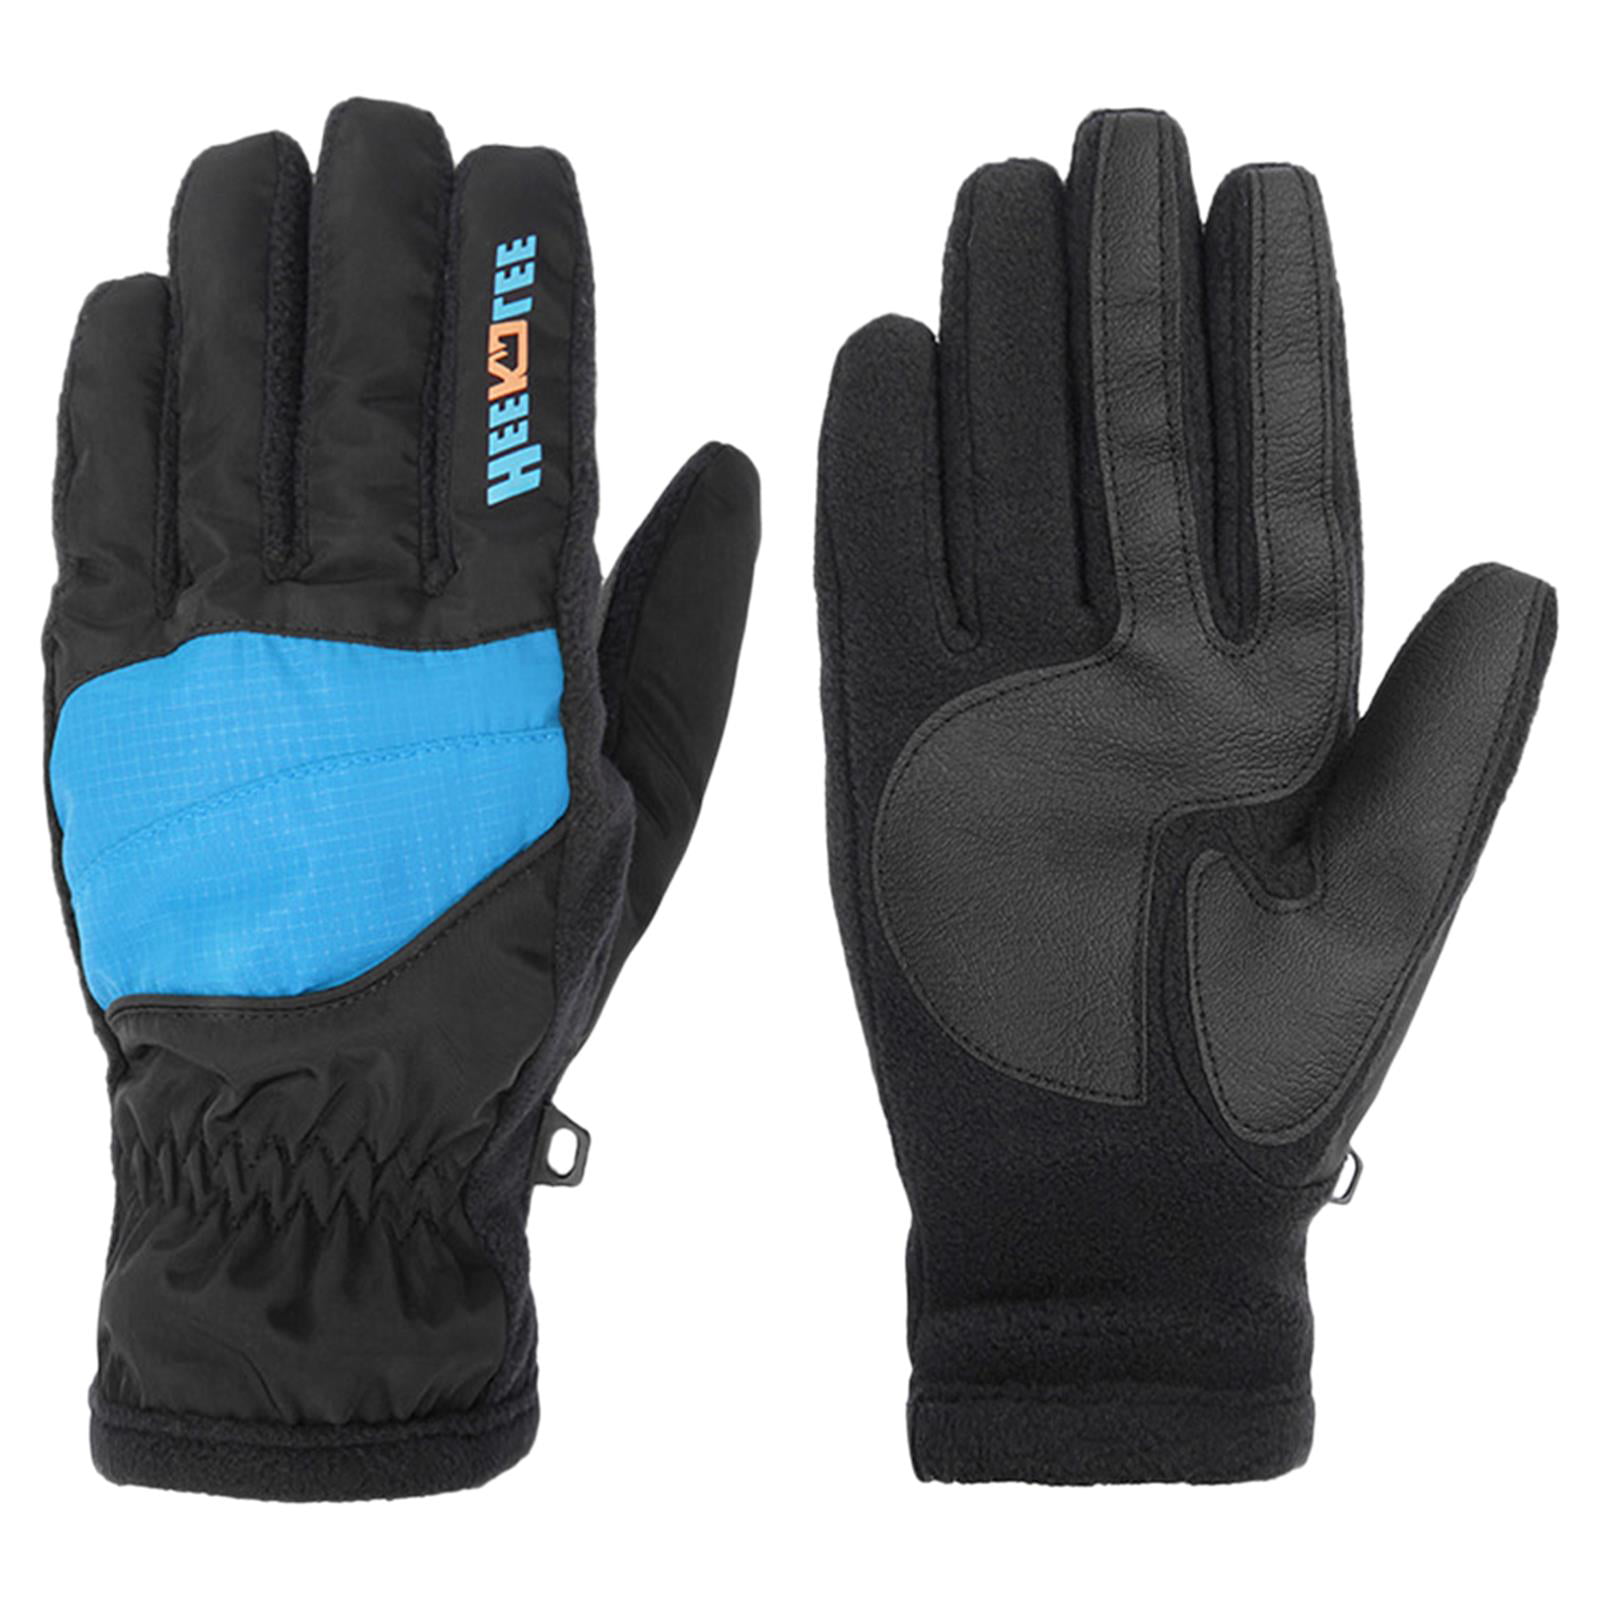 1 Pair Durable Waterproof Winter Warm Touch Screen Gloves for Cycling Running 